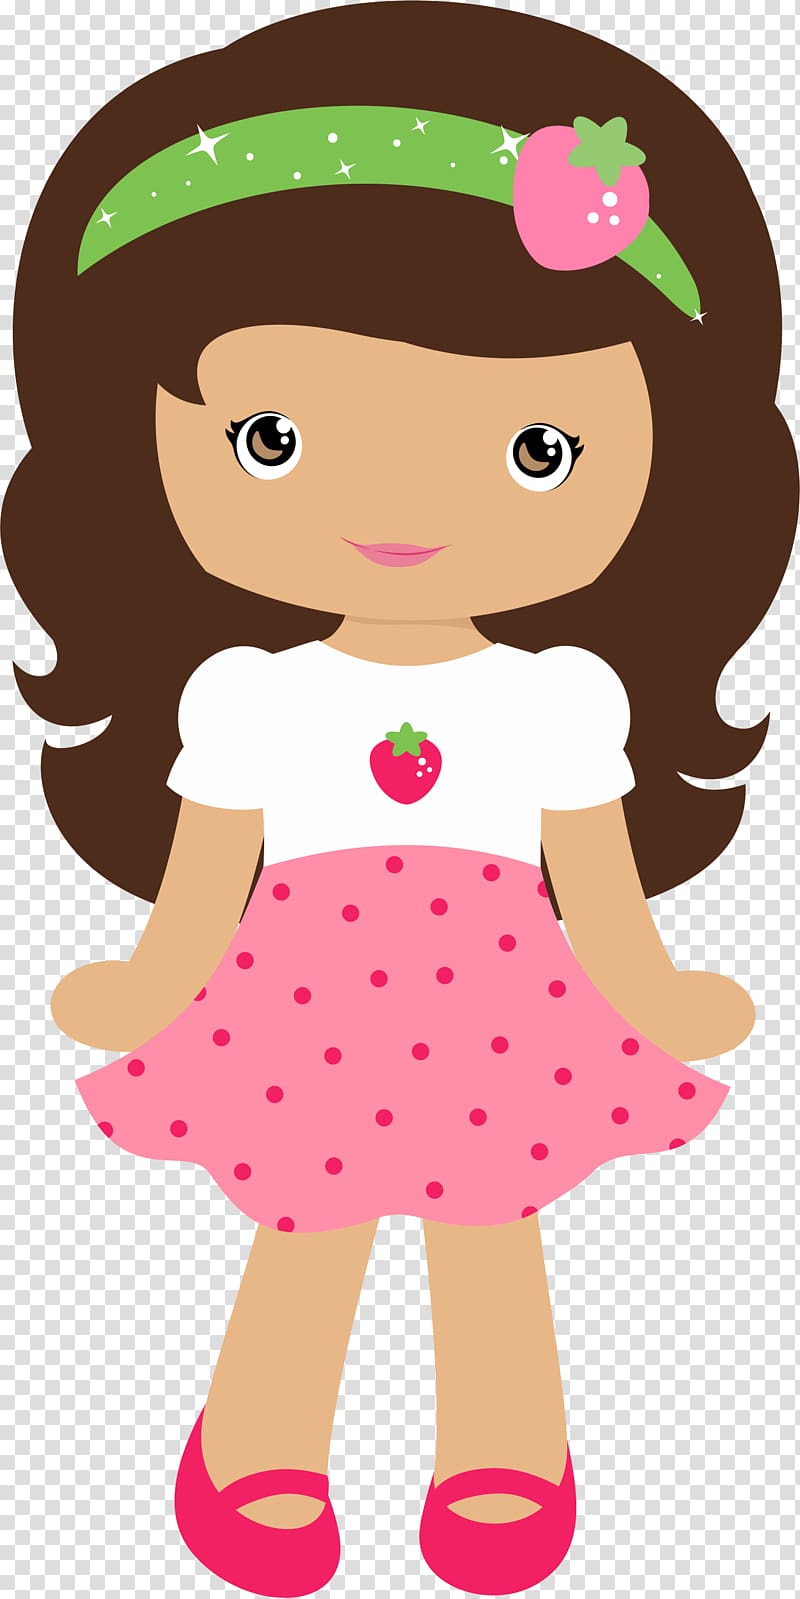 Strawberry Shortcake Strawberry pie Doll , baby girl transparent background PNG clipart